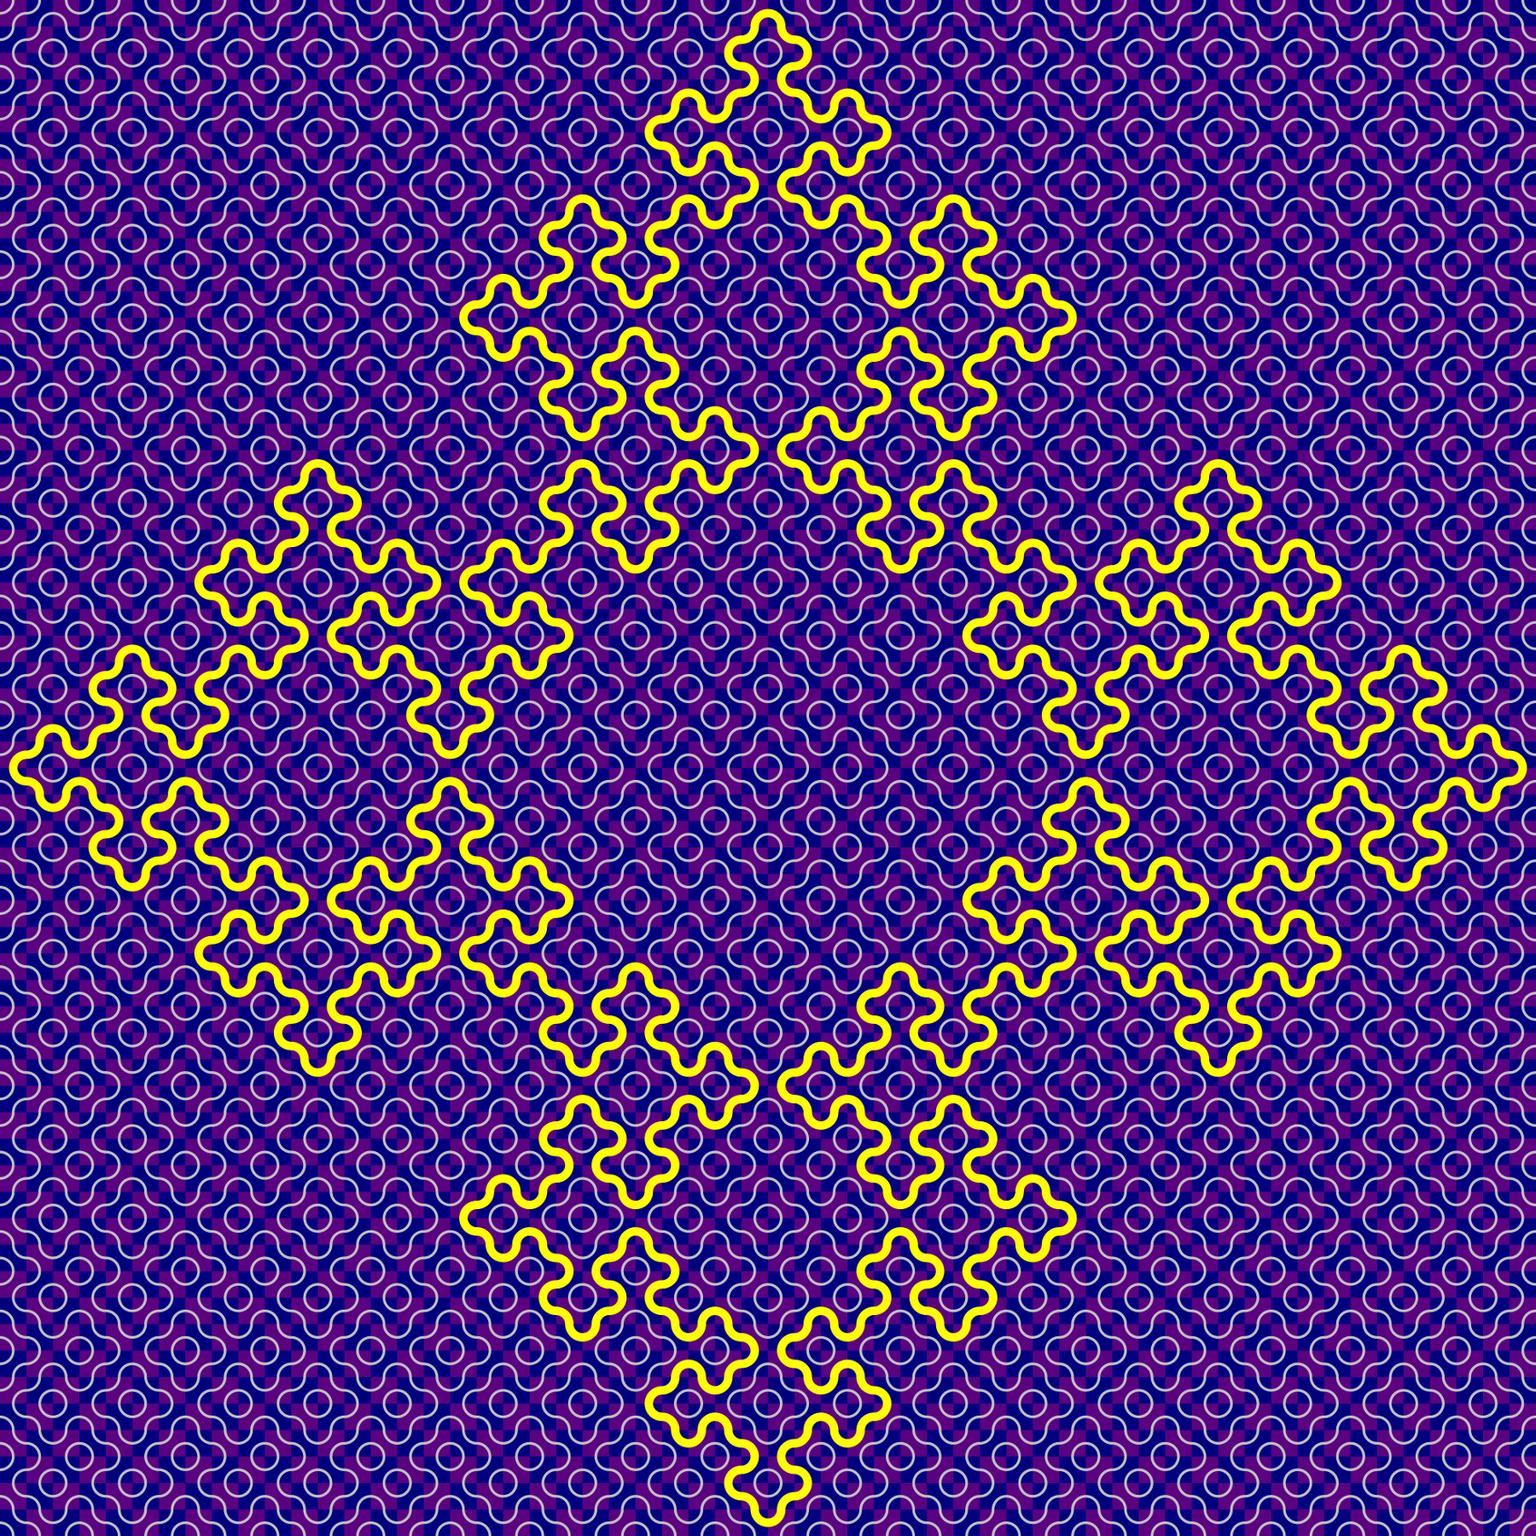 Image for entry 'A curve in a quasi-periodic truchet tiling'